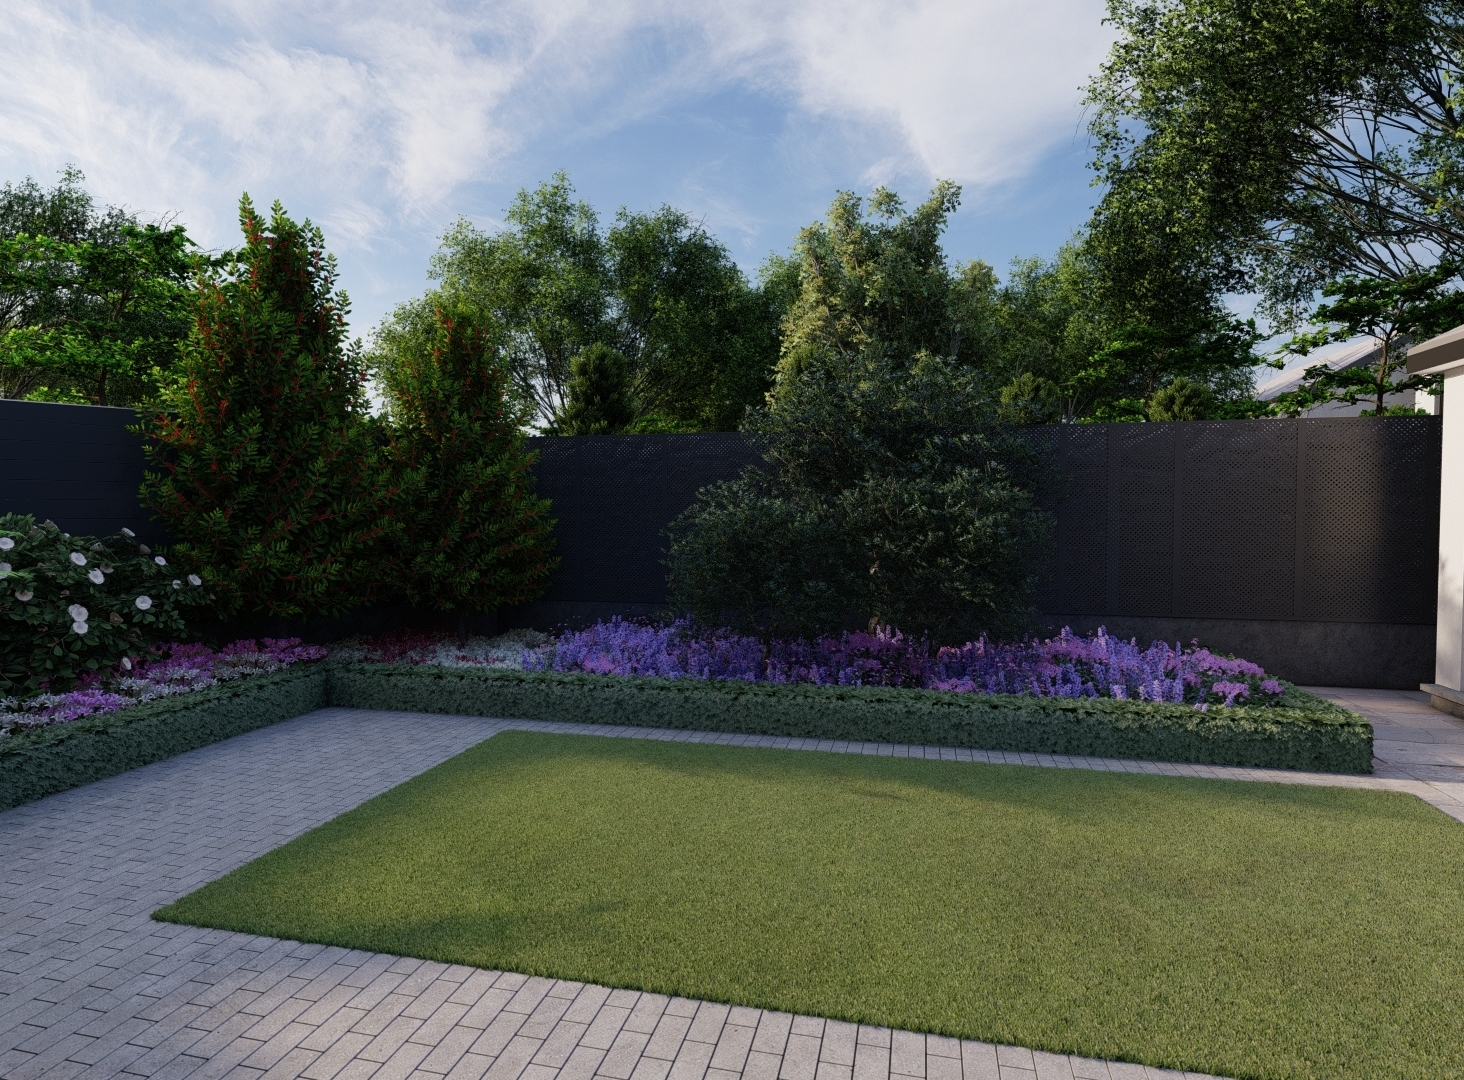 Design Visual for Terenure garden with outdoor BBQ and entertaining area, featuring bespoke fencing, specimen trees and lush planting.